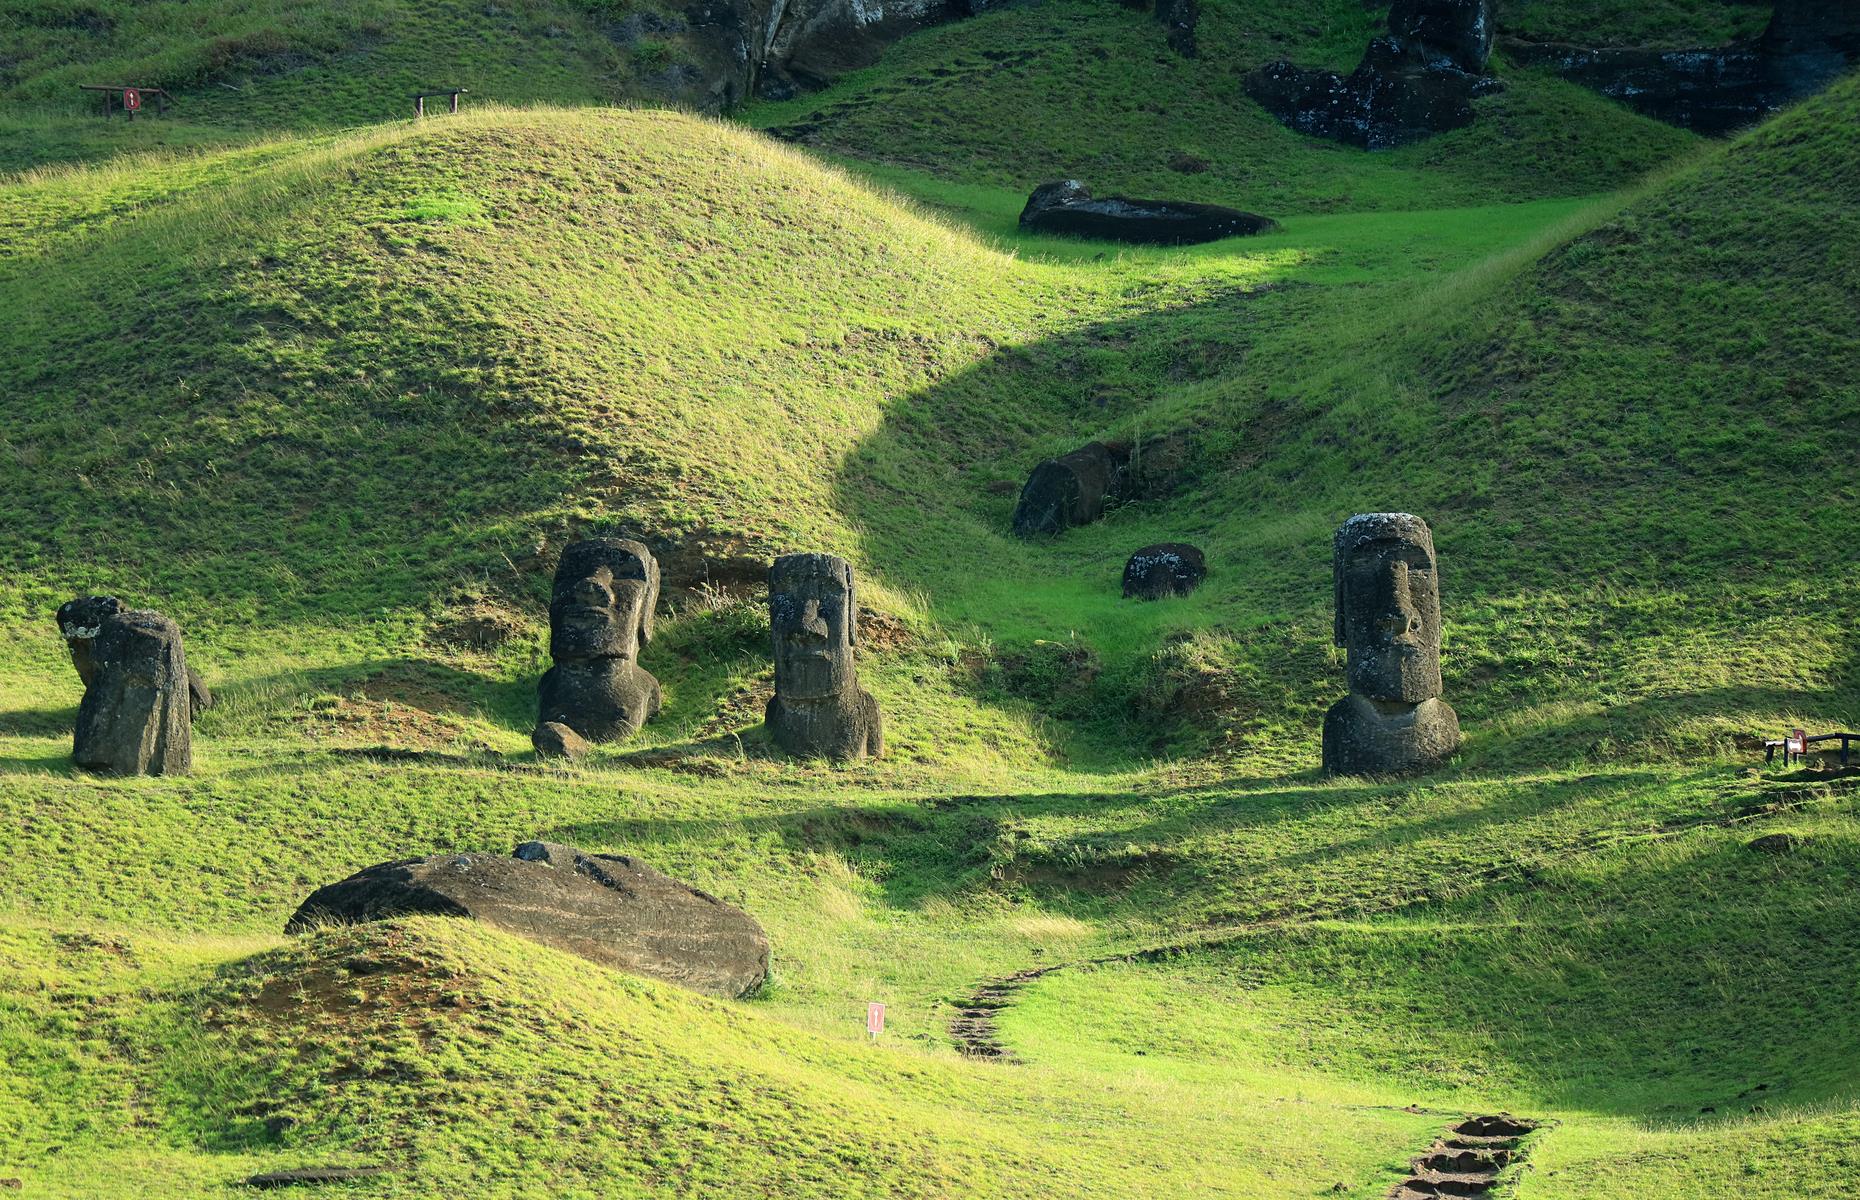 <p>The distinct figures, with their disproportionately giant heads, are thought to honor the Rapa Nui people's ancestors. They are made out of volcanic rock, which was quarried on the island, and reach an average height of 13 feet. They mostly face inland, which is thought to signal guardianship of the land. Bizarrely, by the 18th century all the Moai had been toppled over. Some sources suggest it was due to a civil war or as a protest by the islanders following the arrival of Europeans. They've since been restored. </p>